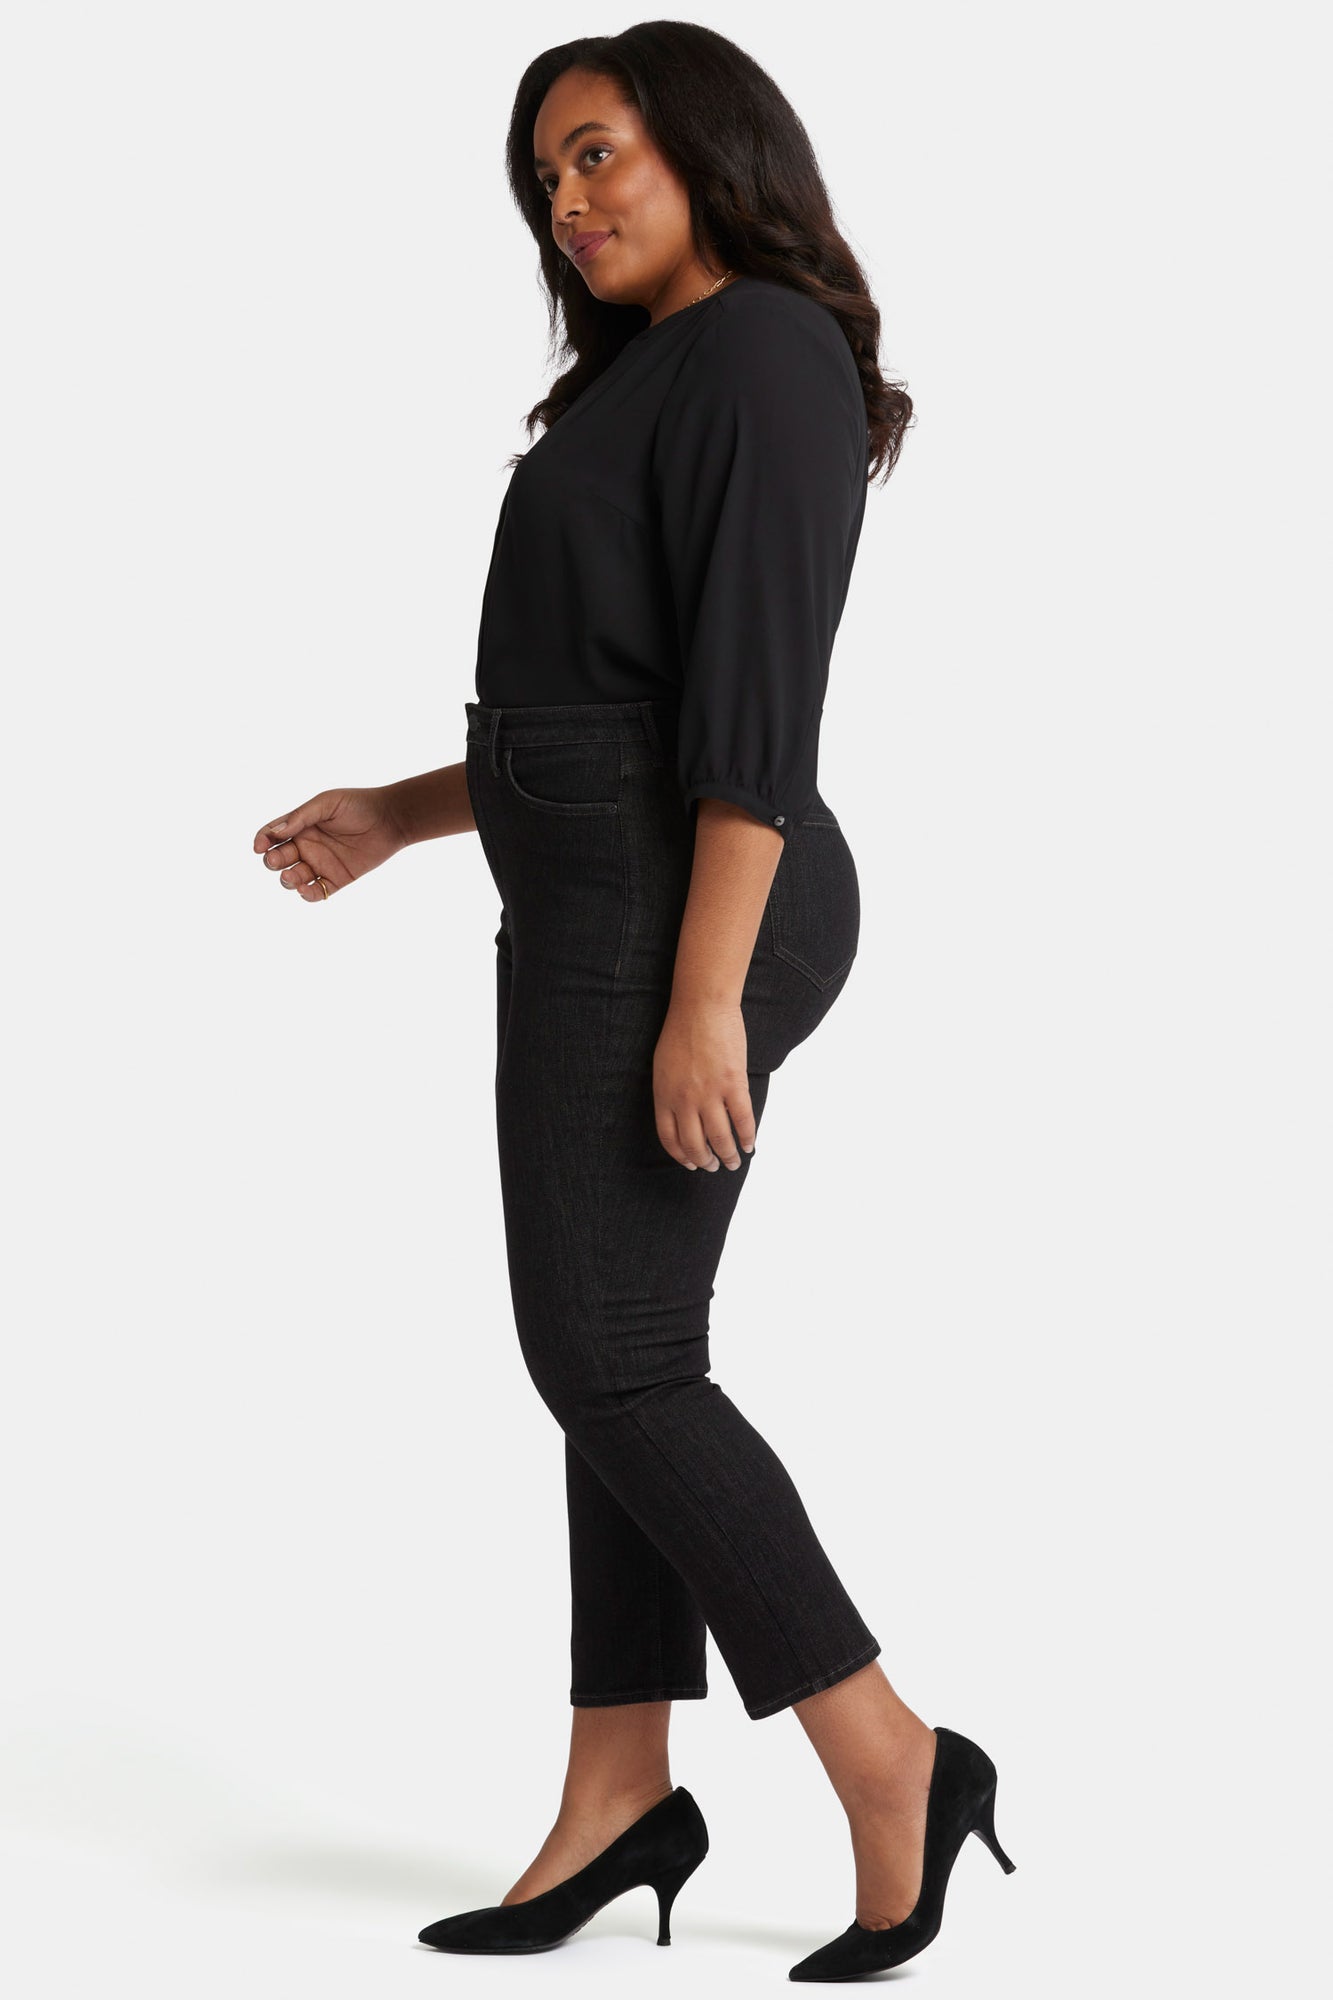 NYDJ Curve Shaper™ Sheri Slim Ankle Jeans In Plus Size With High Rise - Gardenranch